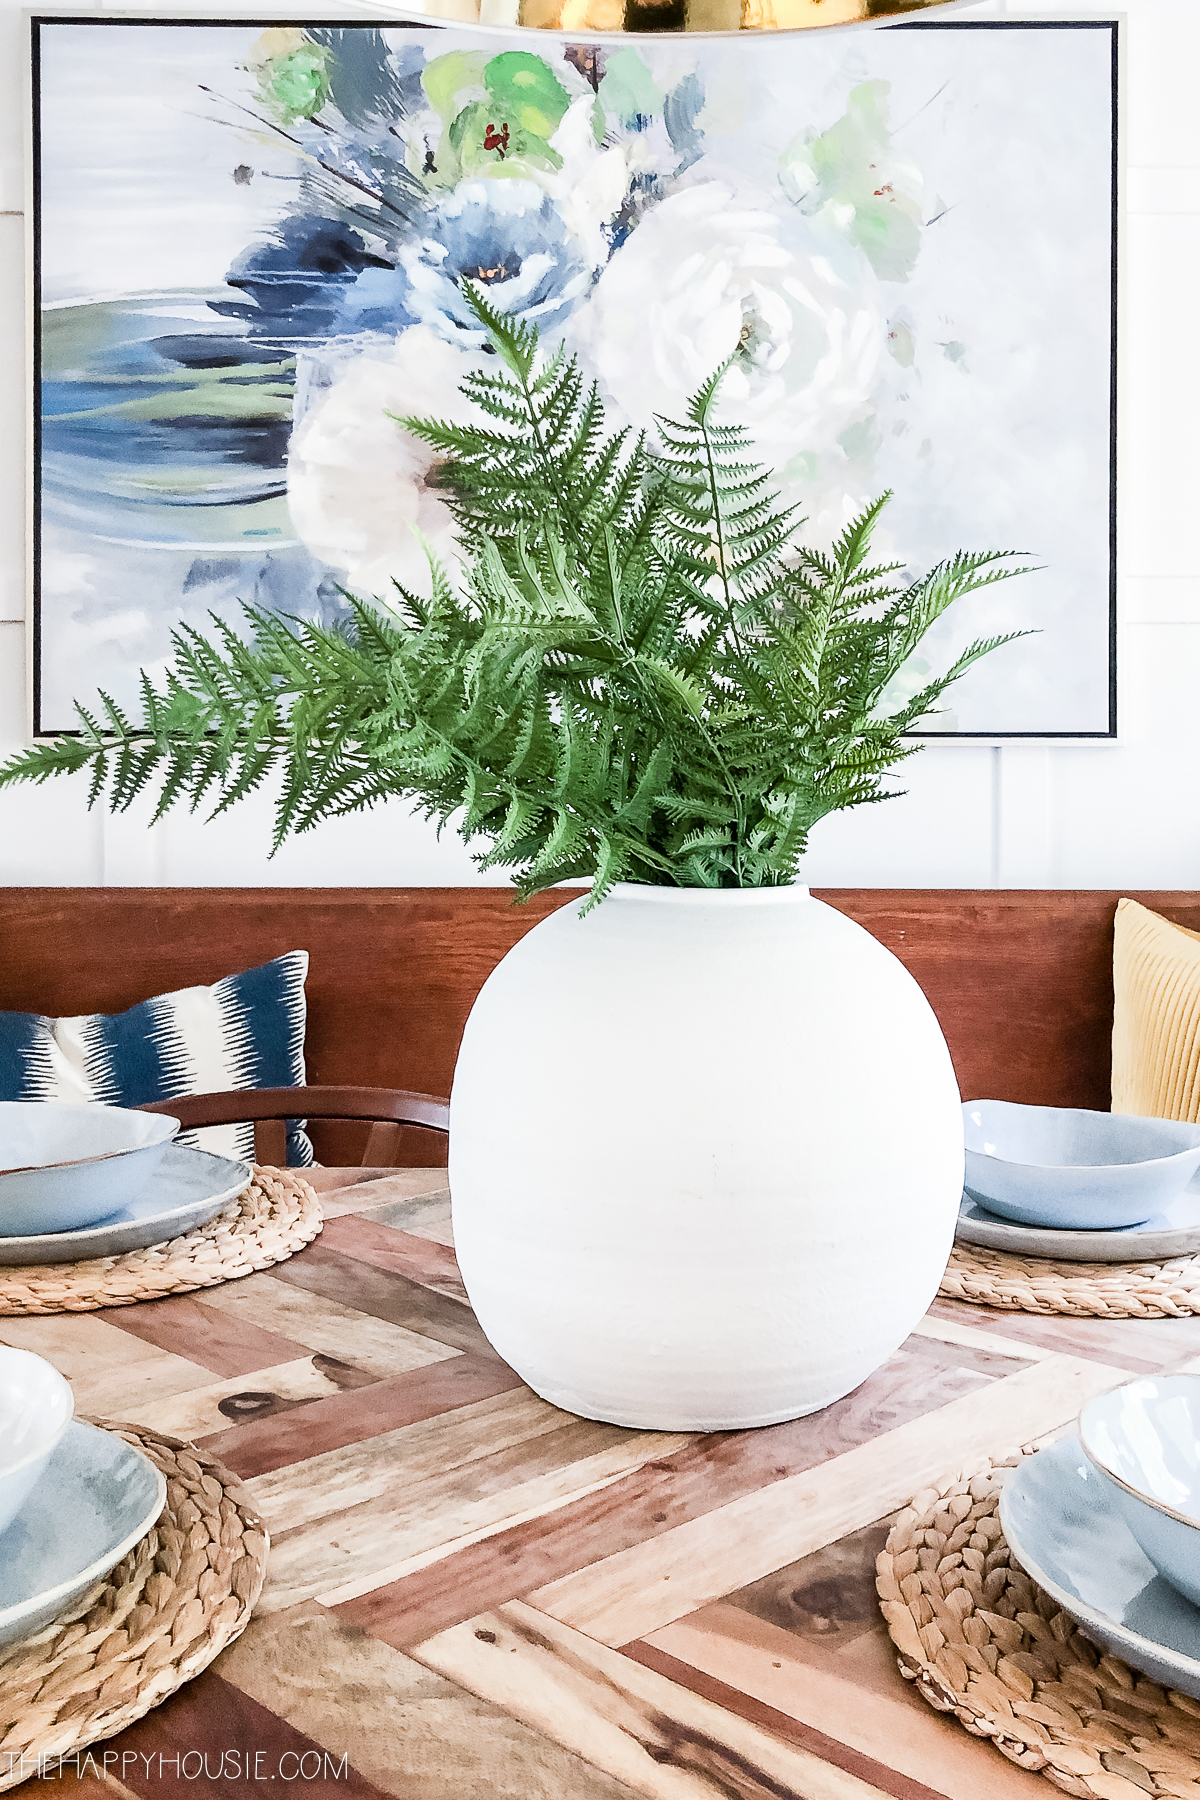 A white vase with ferns in it and a picture behind it on the table.